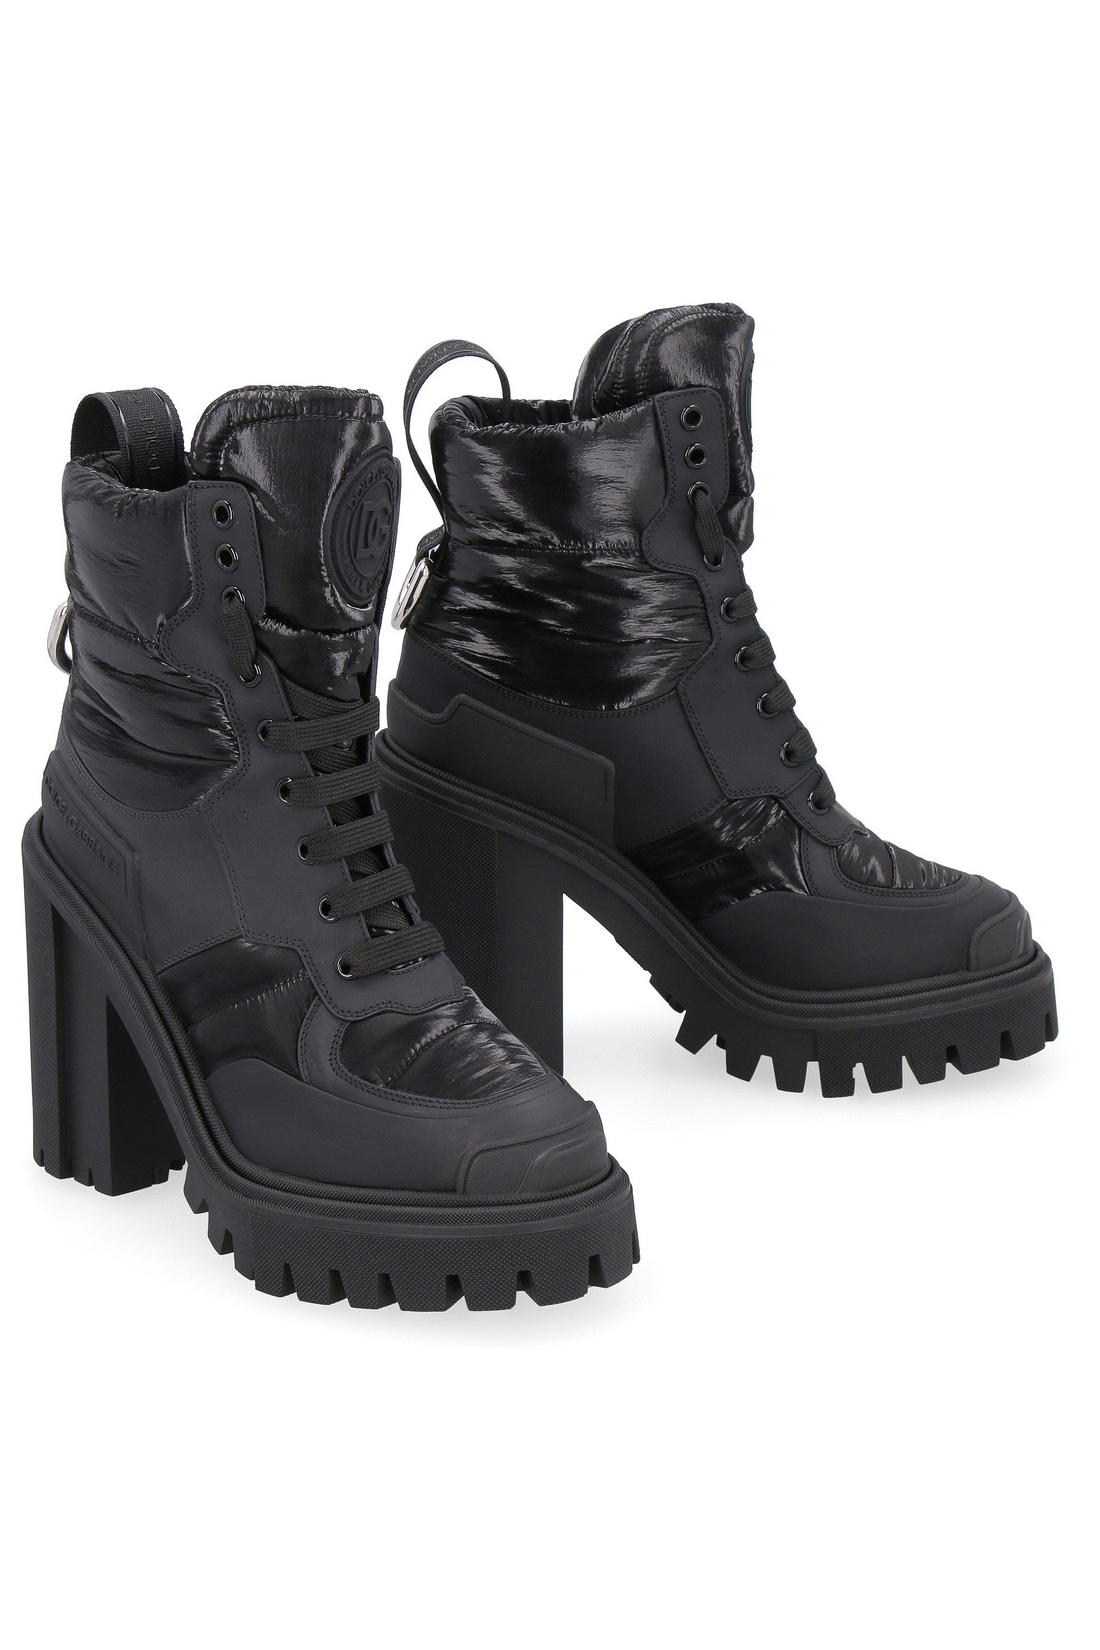 Lace-up ankle boots